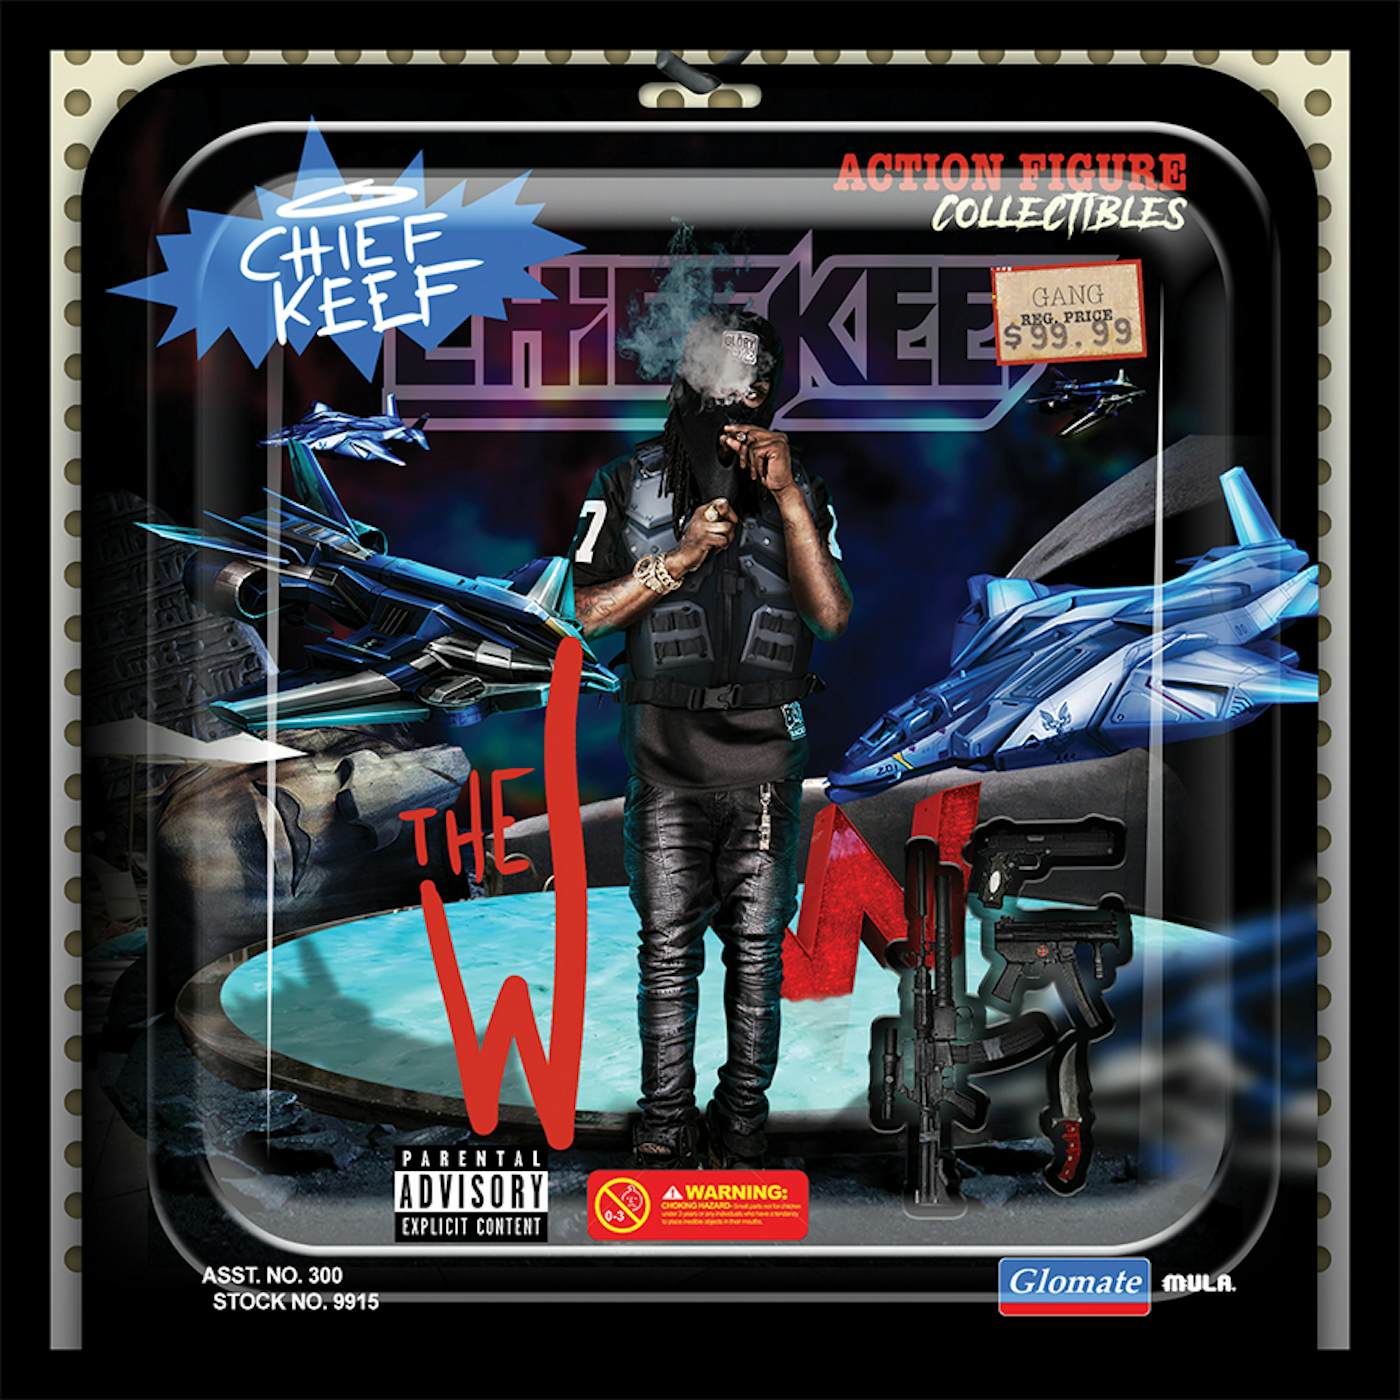 Chief Keef THE W CD